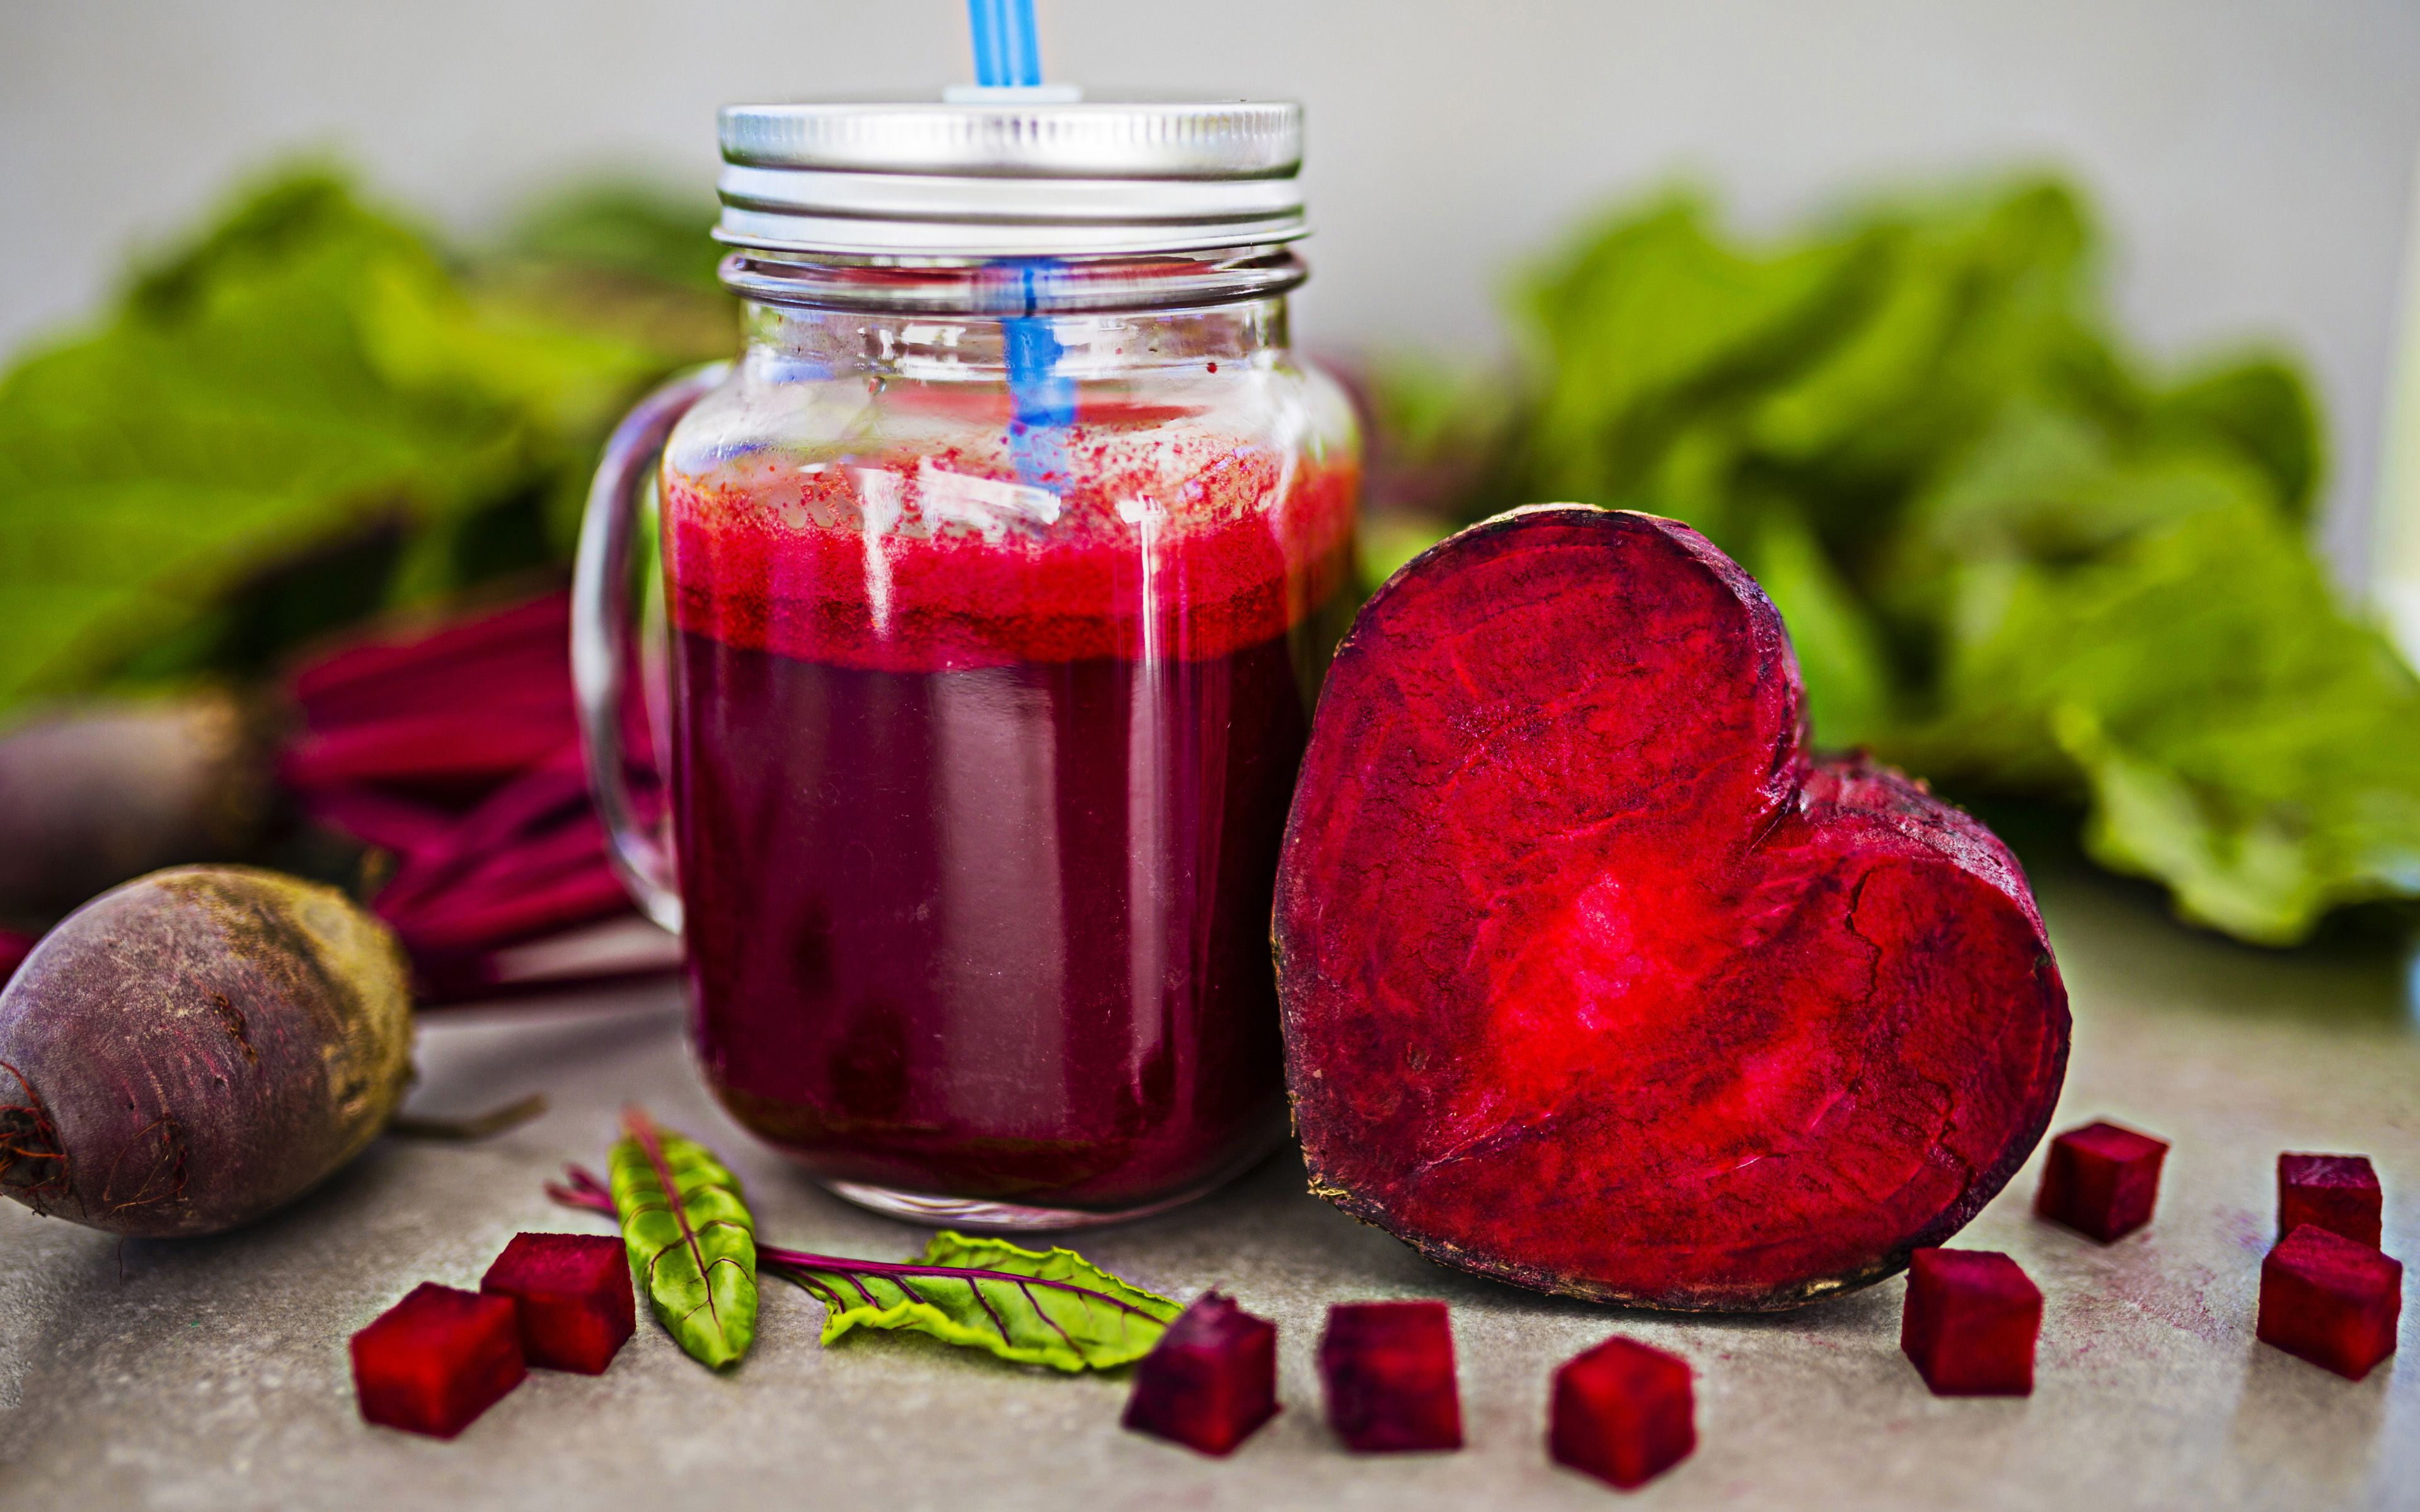 Beets Nutrition - Health Benefits, Types, How To Cook, Prepare